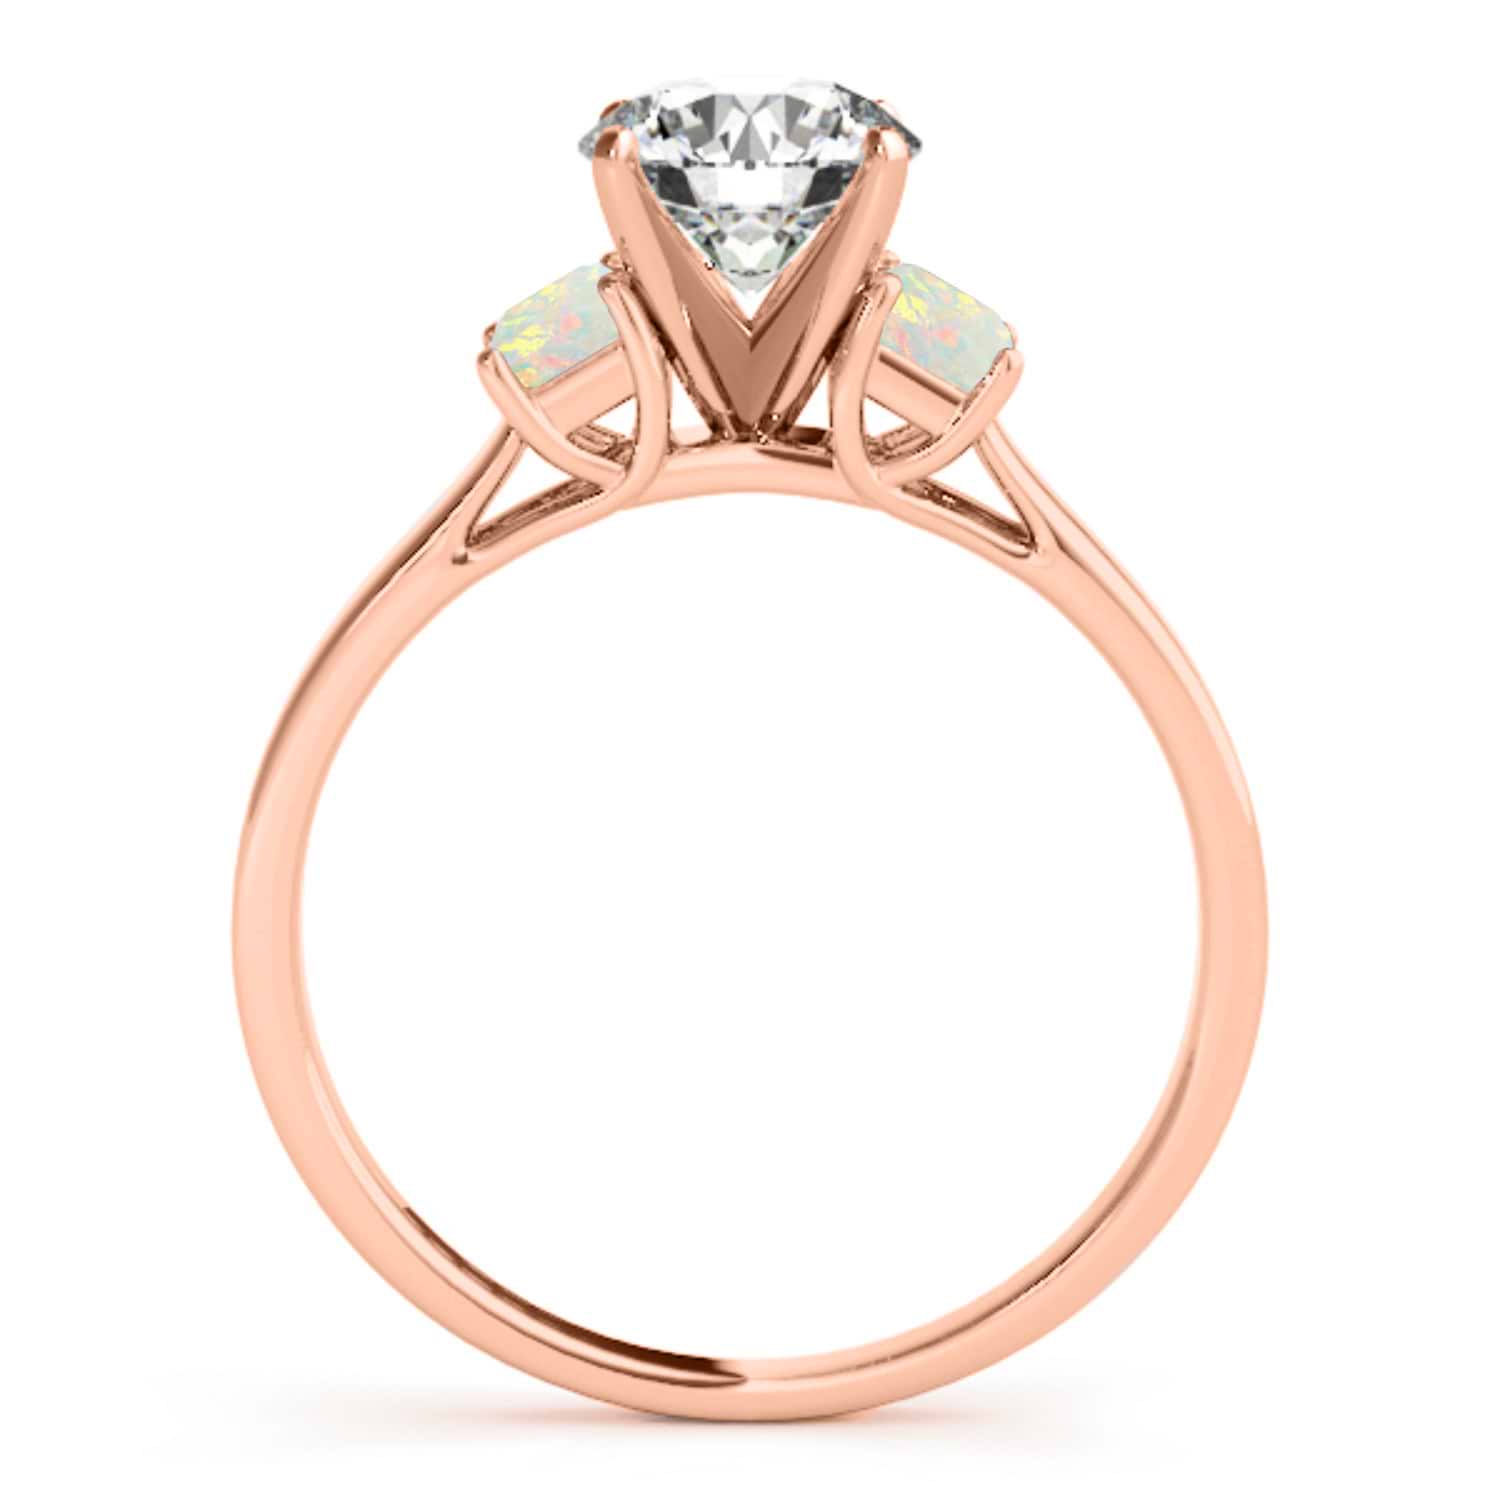 Trio Emerald Cut Opal Engagement Ring 14k Rose Gold (0.30ct)